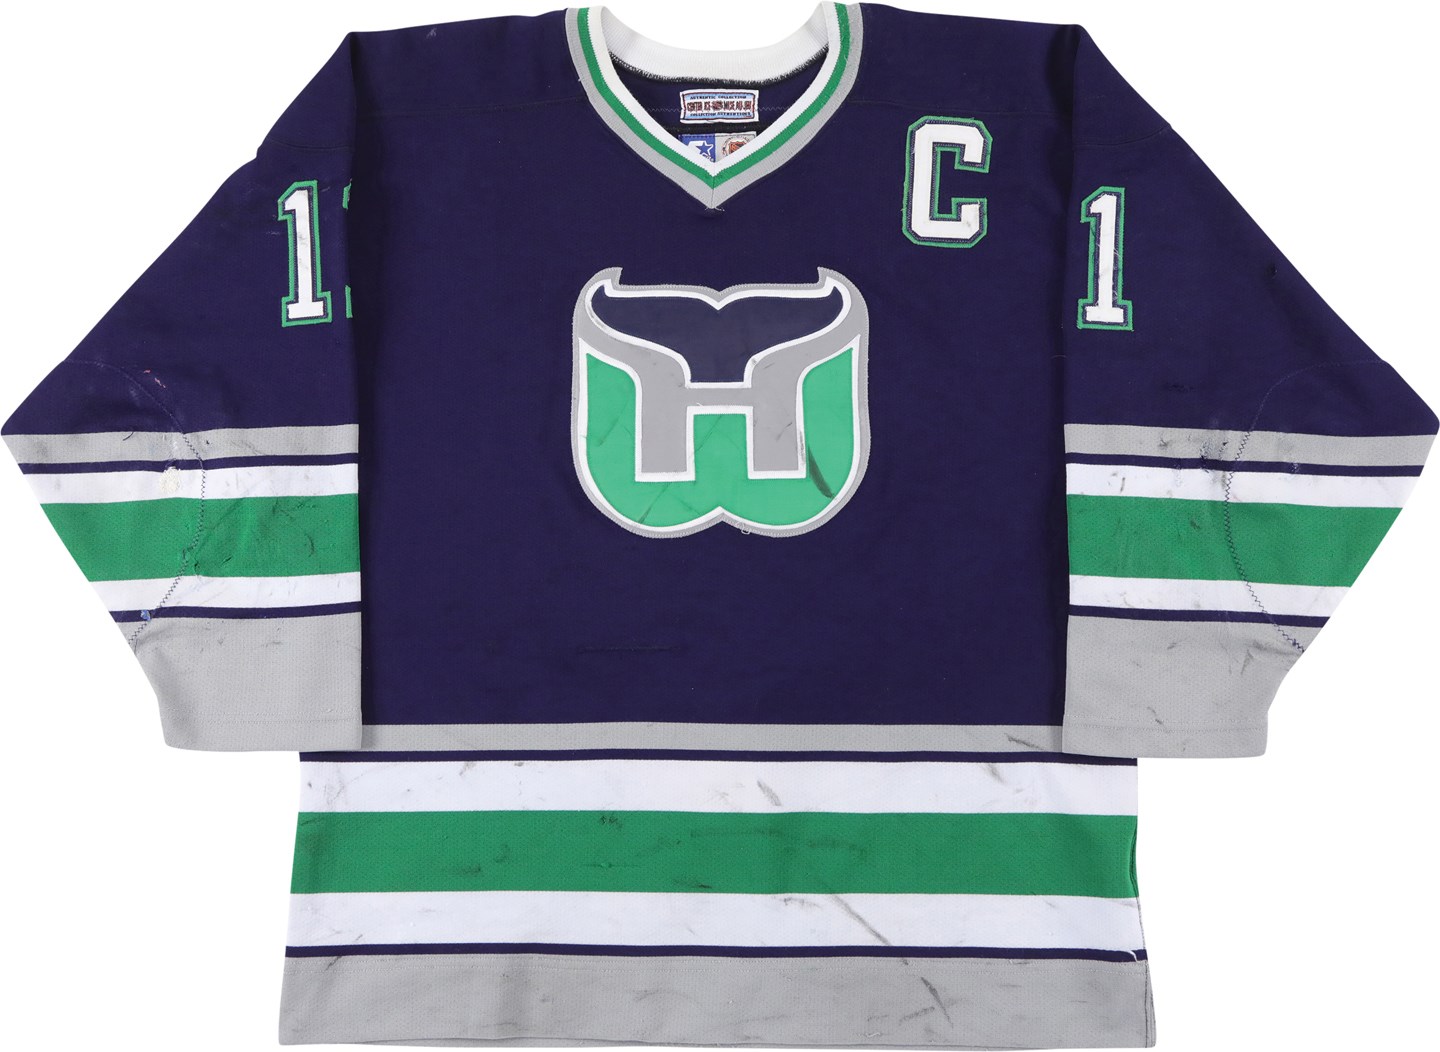 Hockey - 1996-97 Kevin Dineen Hartford Whalers Game Worn Jersey - Whalers Final Season (Three Photo-Matches & Team Sourced)